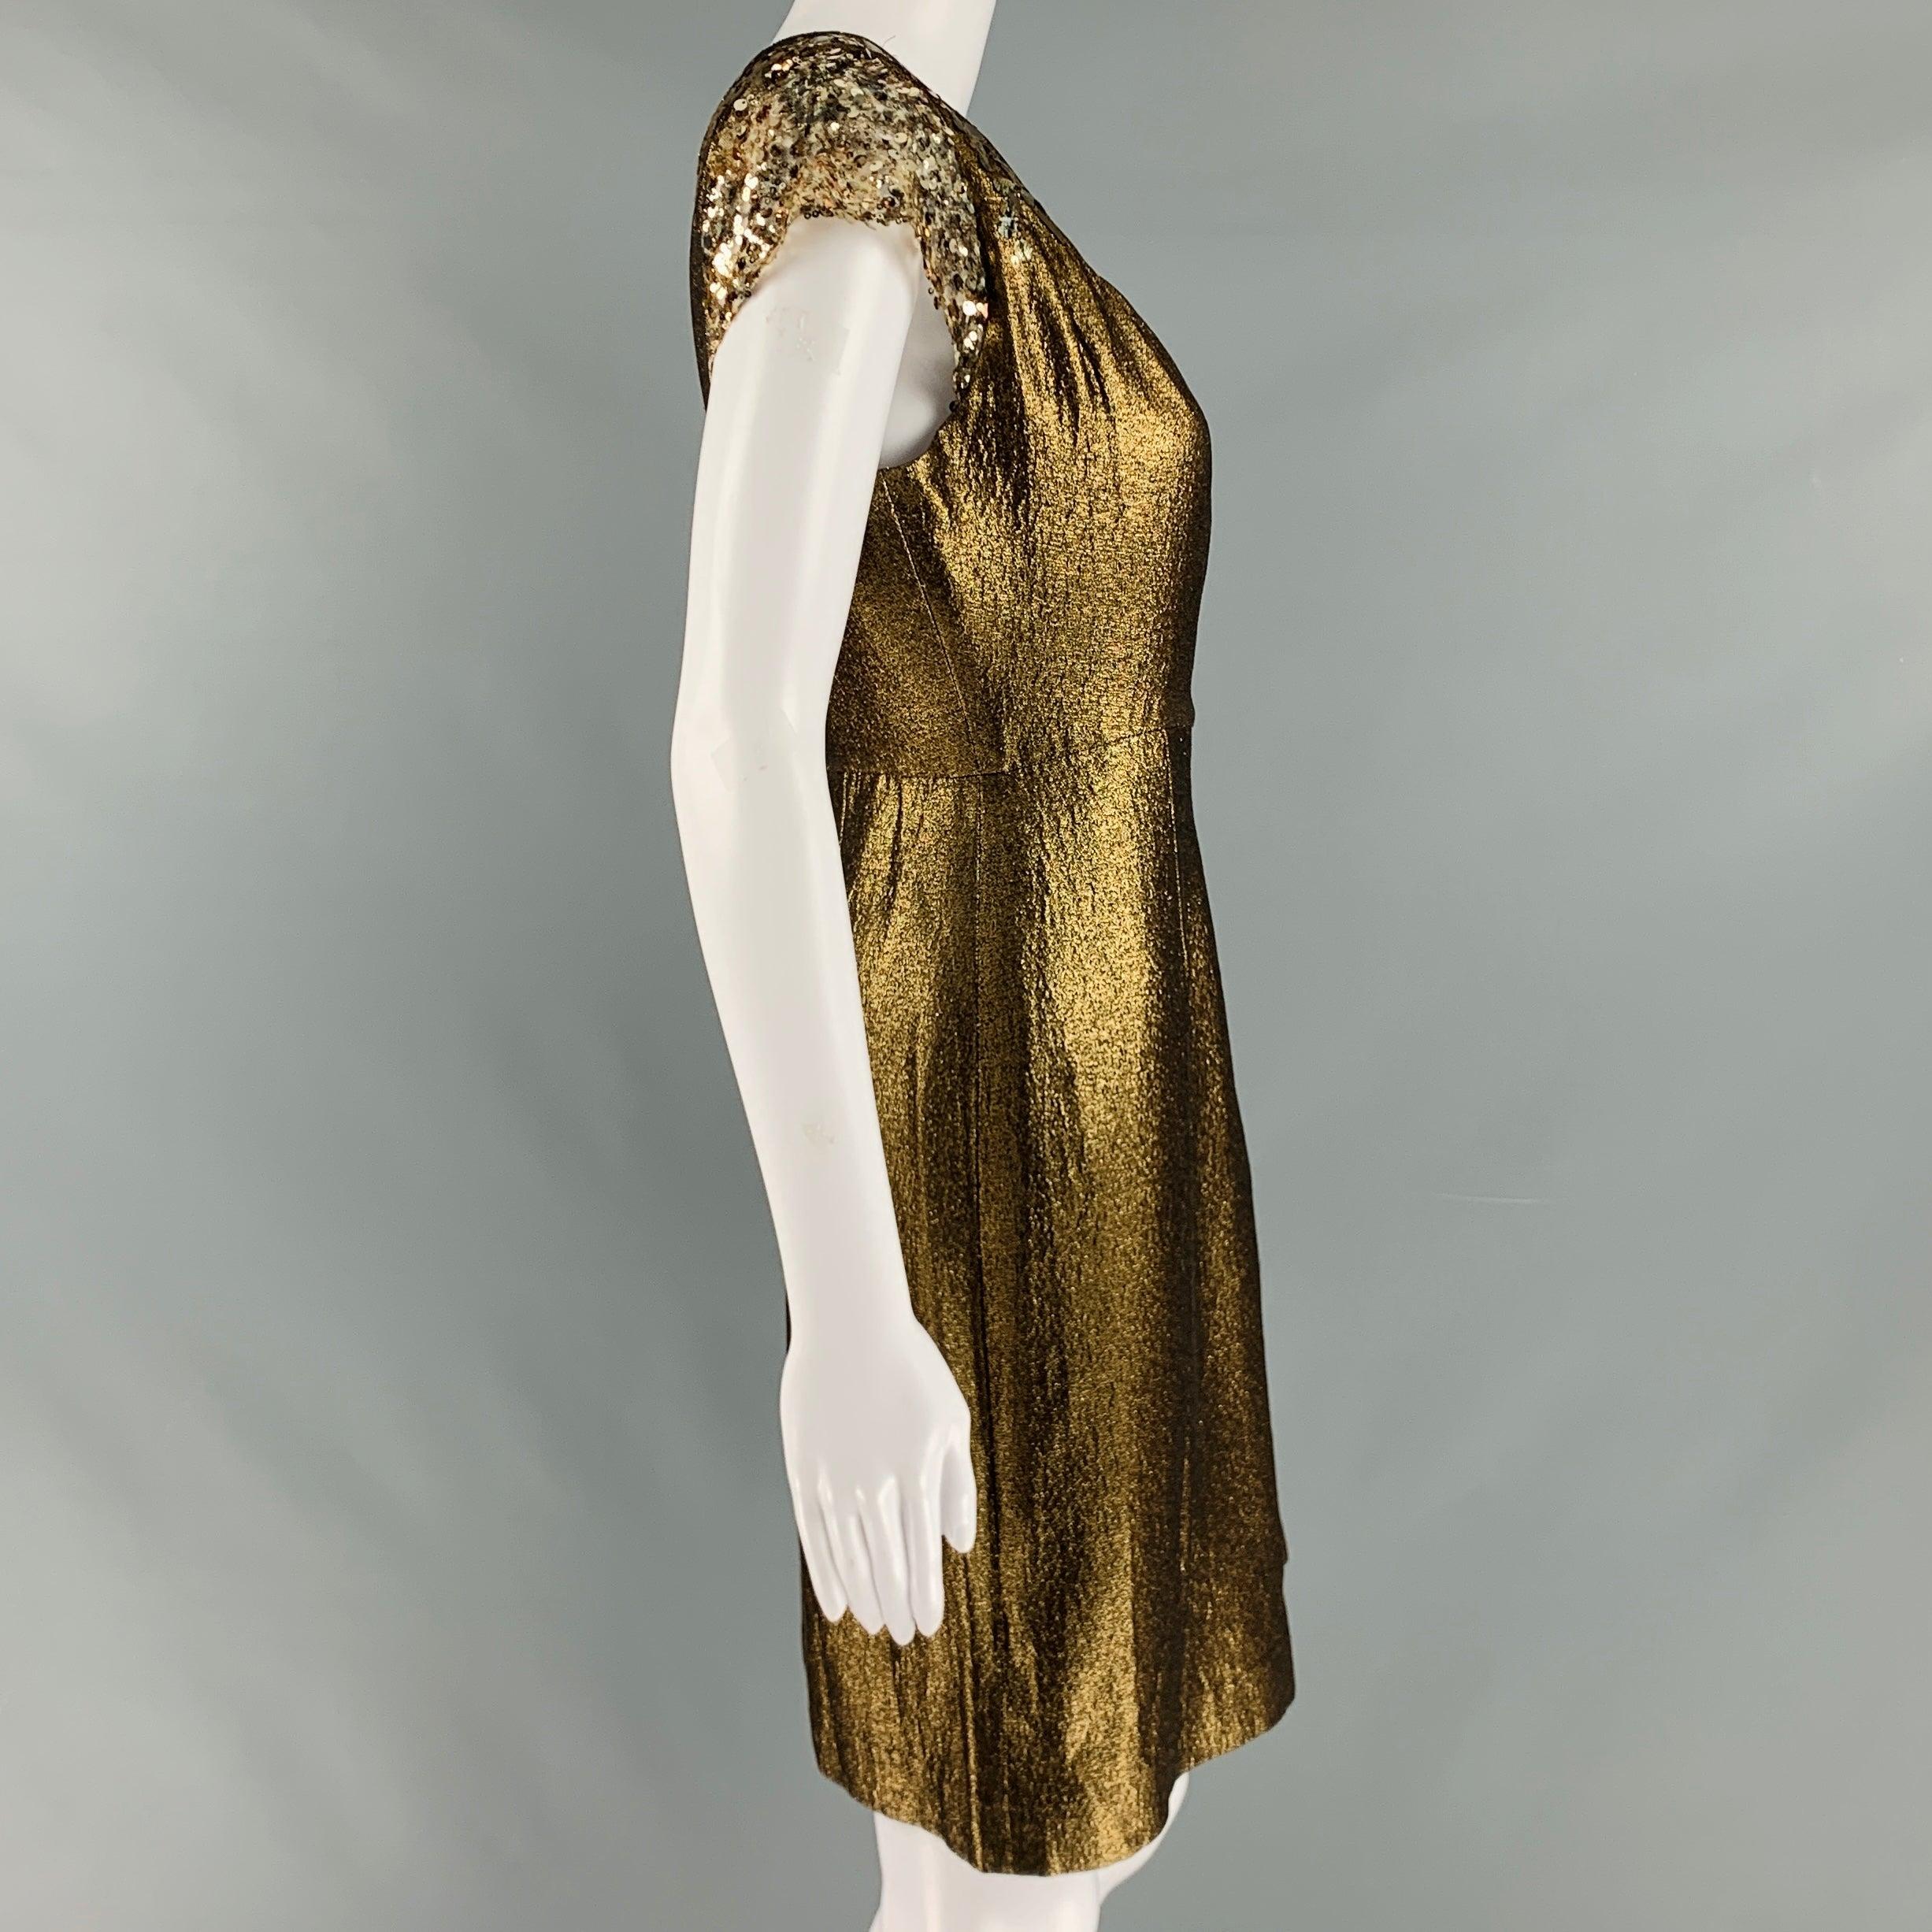 ELIE TAHARI Size 8 Gold Cotton Blend One Shoulder Cocktail Dress In Good Condition For Sale In San Francisco, CA